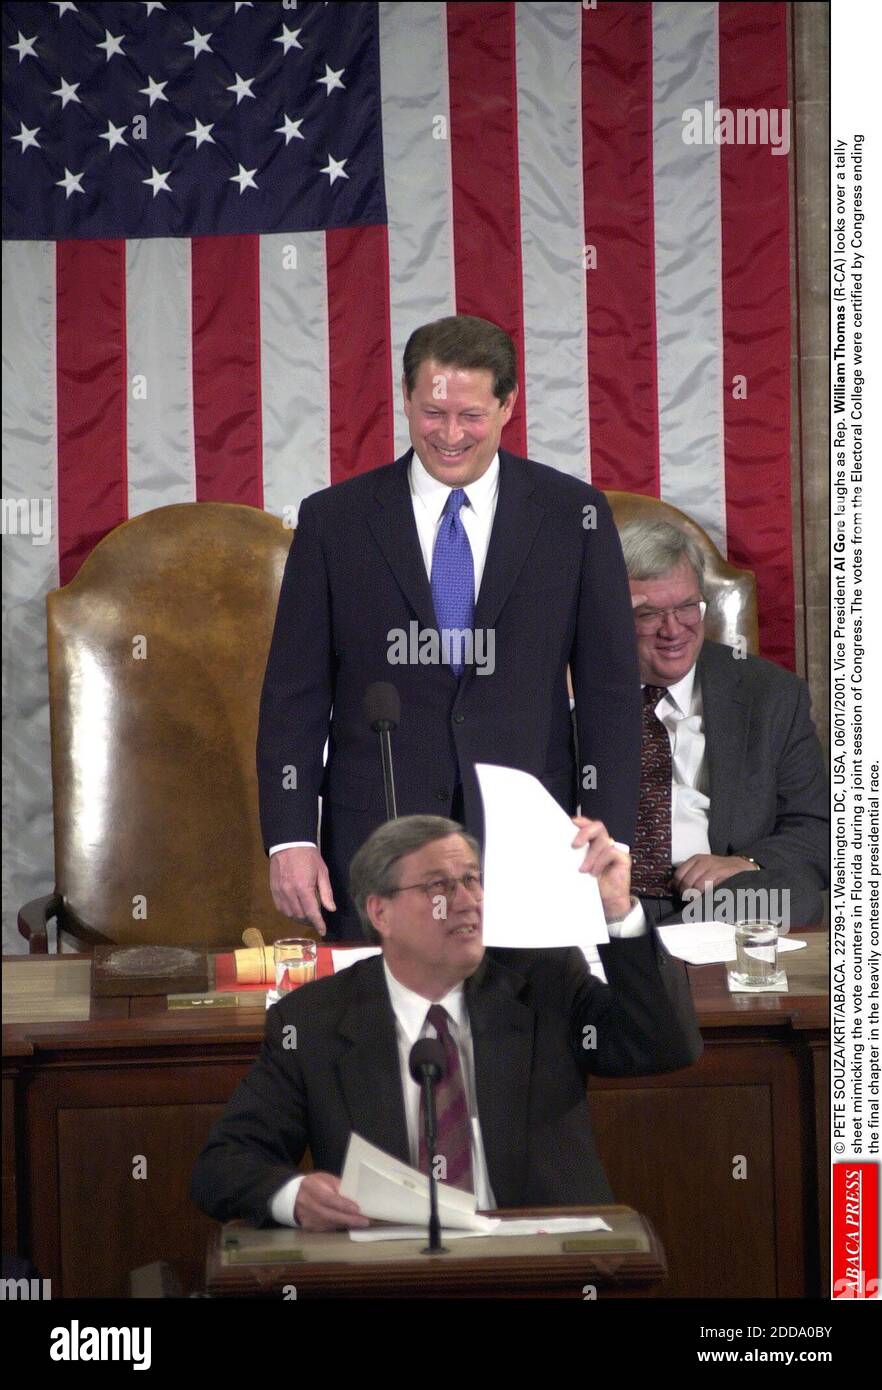 NO FILM, NO VIDEO, NO TV, NO DOCUMENTARY - © PETE SOUZA/KRT/ABACA. 22799-1. Washington DC, USA, 06/01/2001. Vice President Al Gore laughs as Rep. William Thomas (R-CA) looks over a tally sheet mimicking the vote counters in Florida during a joint session of Congress. The votes from the Electoral C Stock Photo